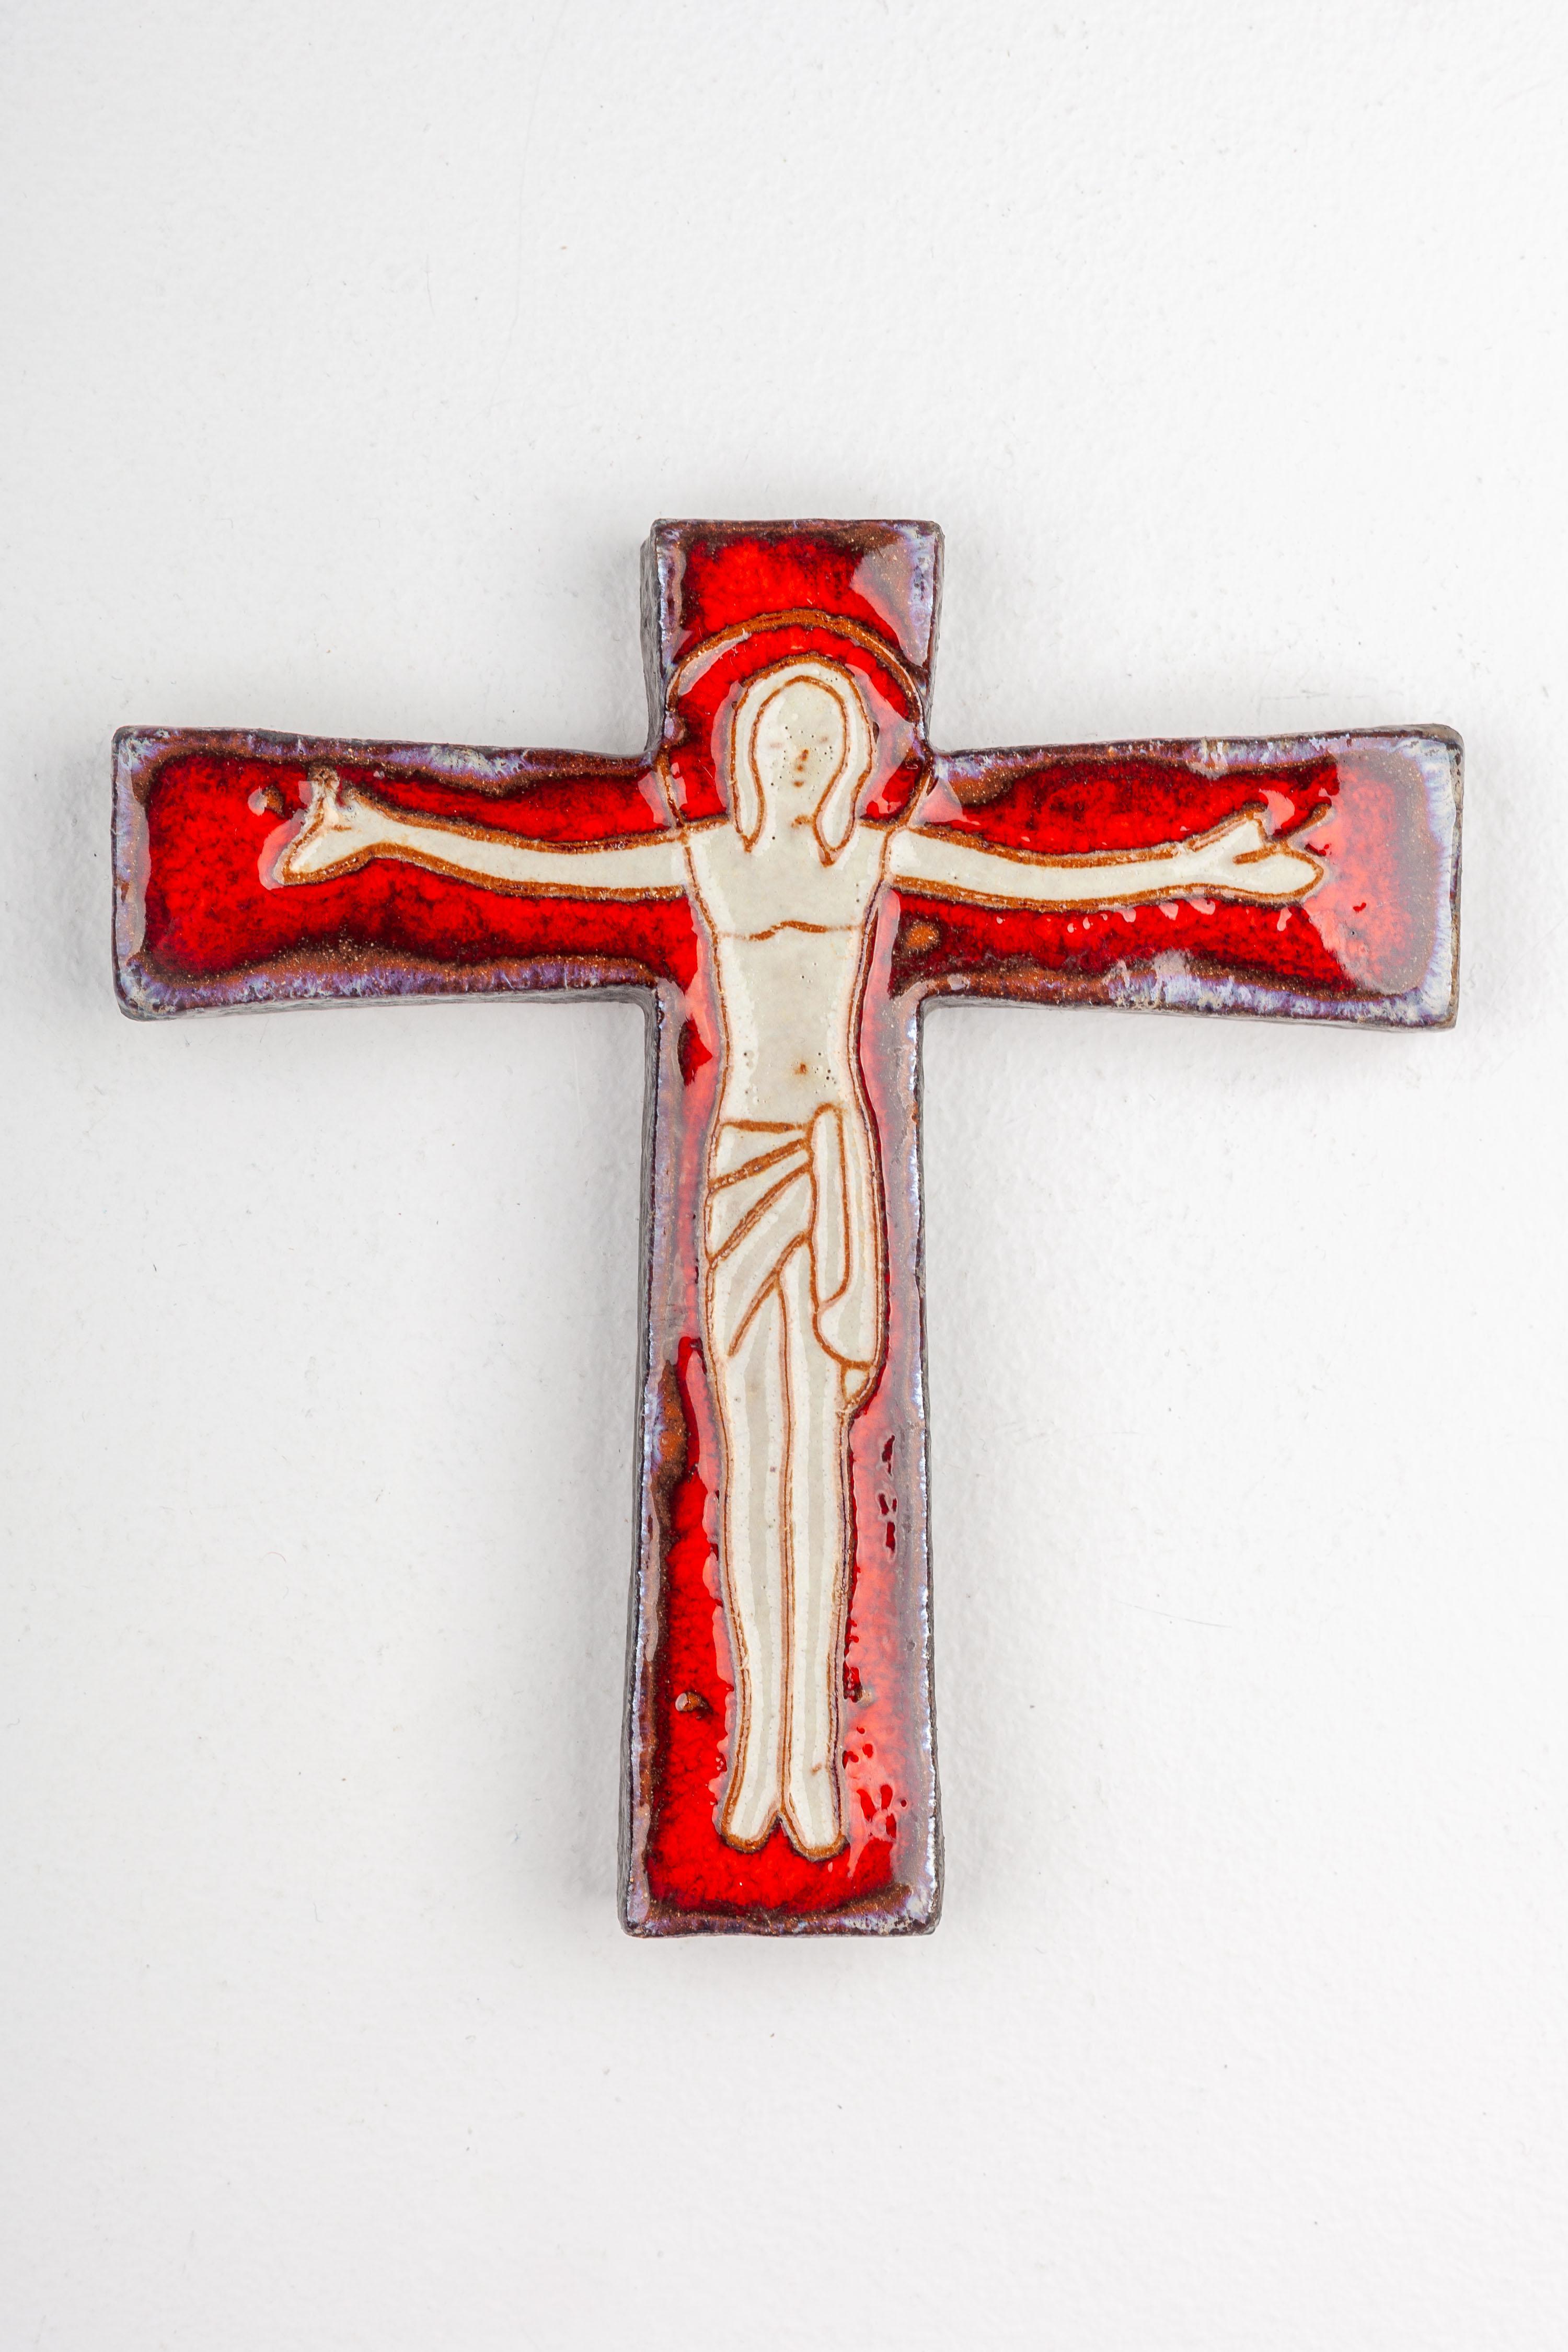 Mid Century Ceramic Wall Cross, Red & Beige, Hand Made Studio Pottery, Europe For Sale 5